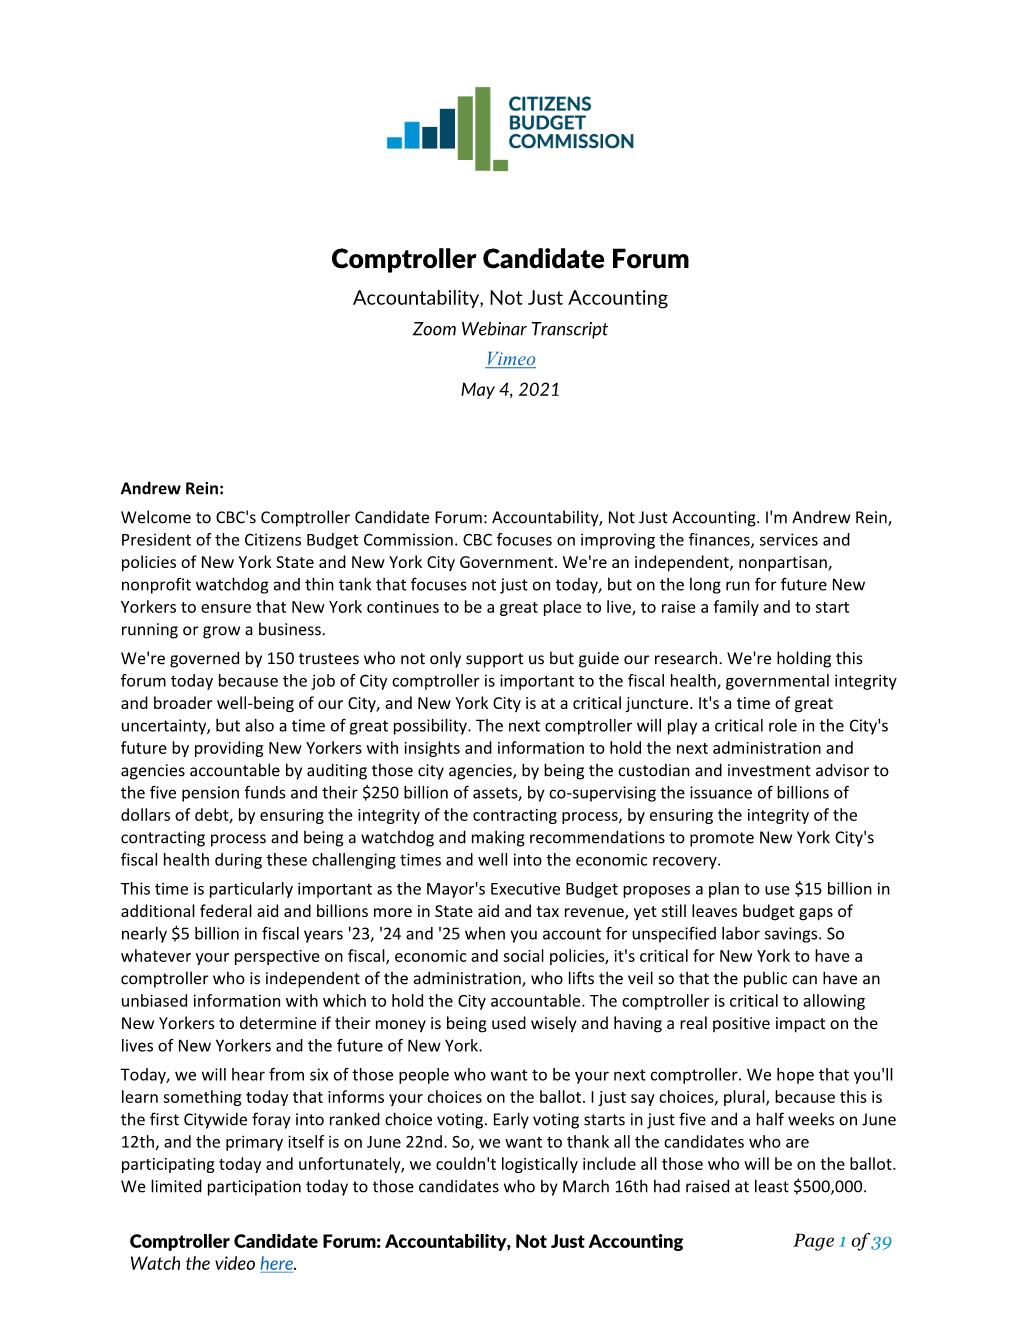 Comptroller Candidate Forum Accountability, Not Just Accounting Zoom Webinar Transcript Vimeo May 4, 2021